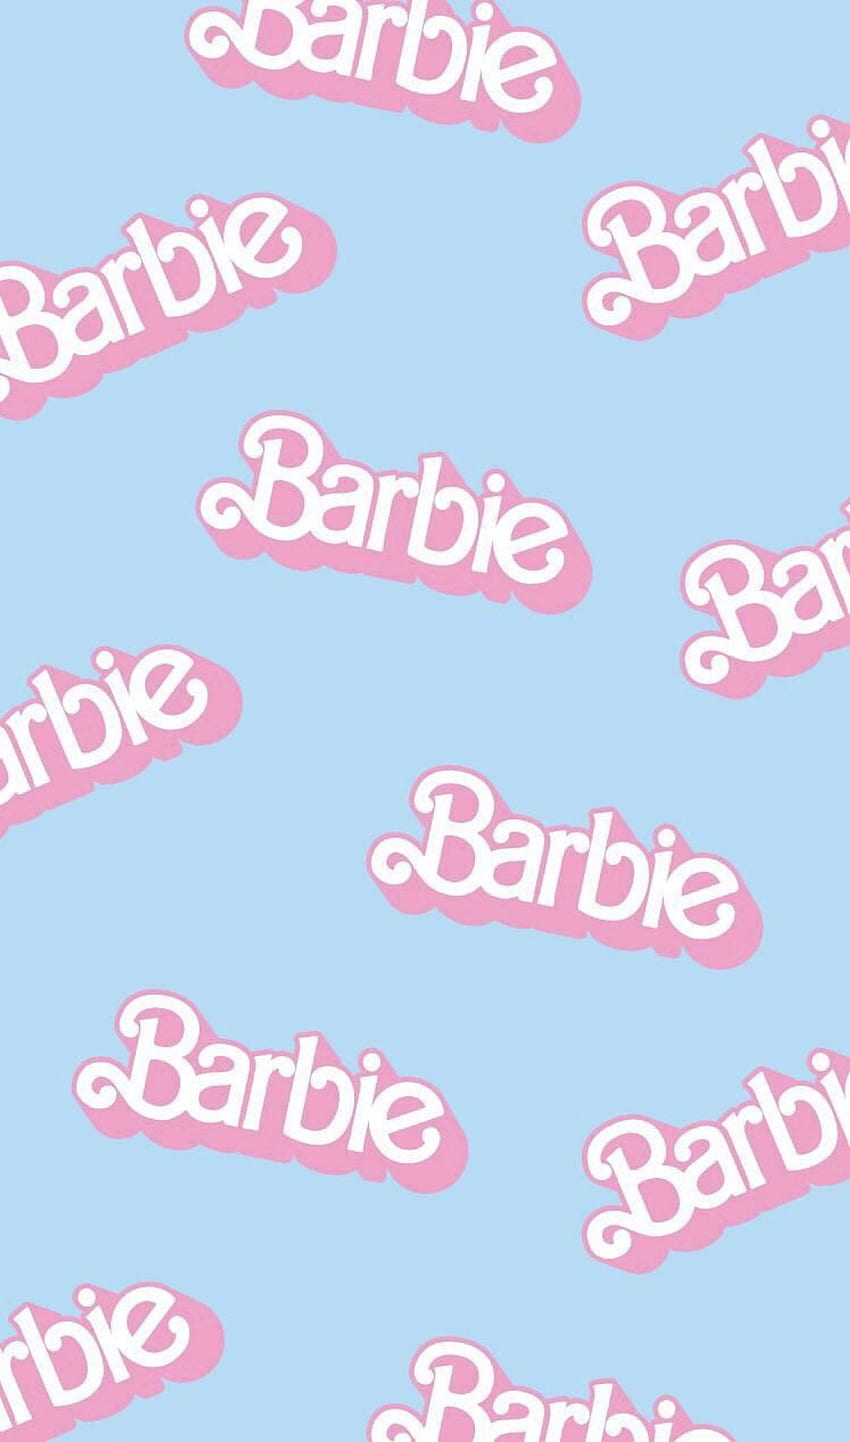 barbie wallpaper for iphone